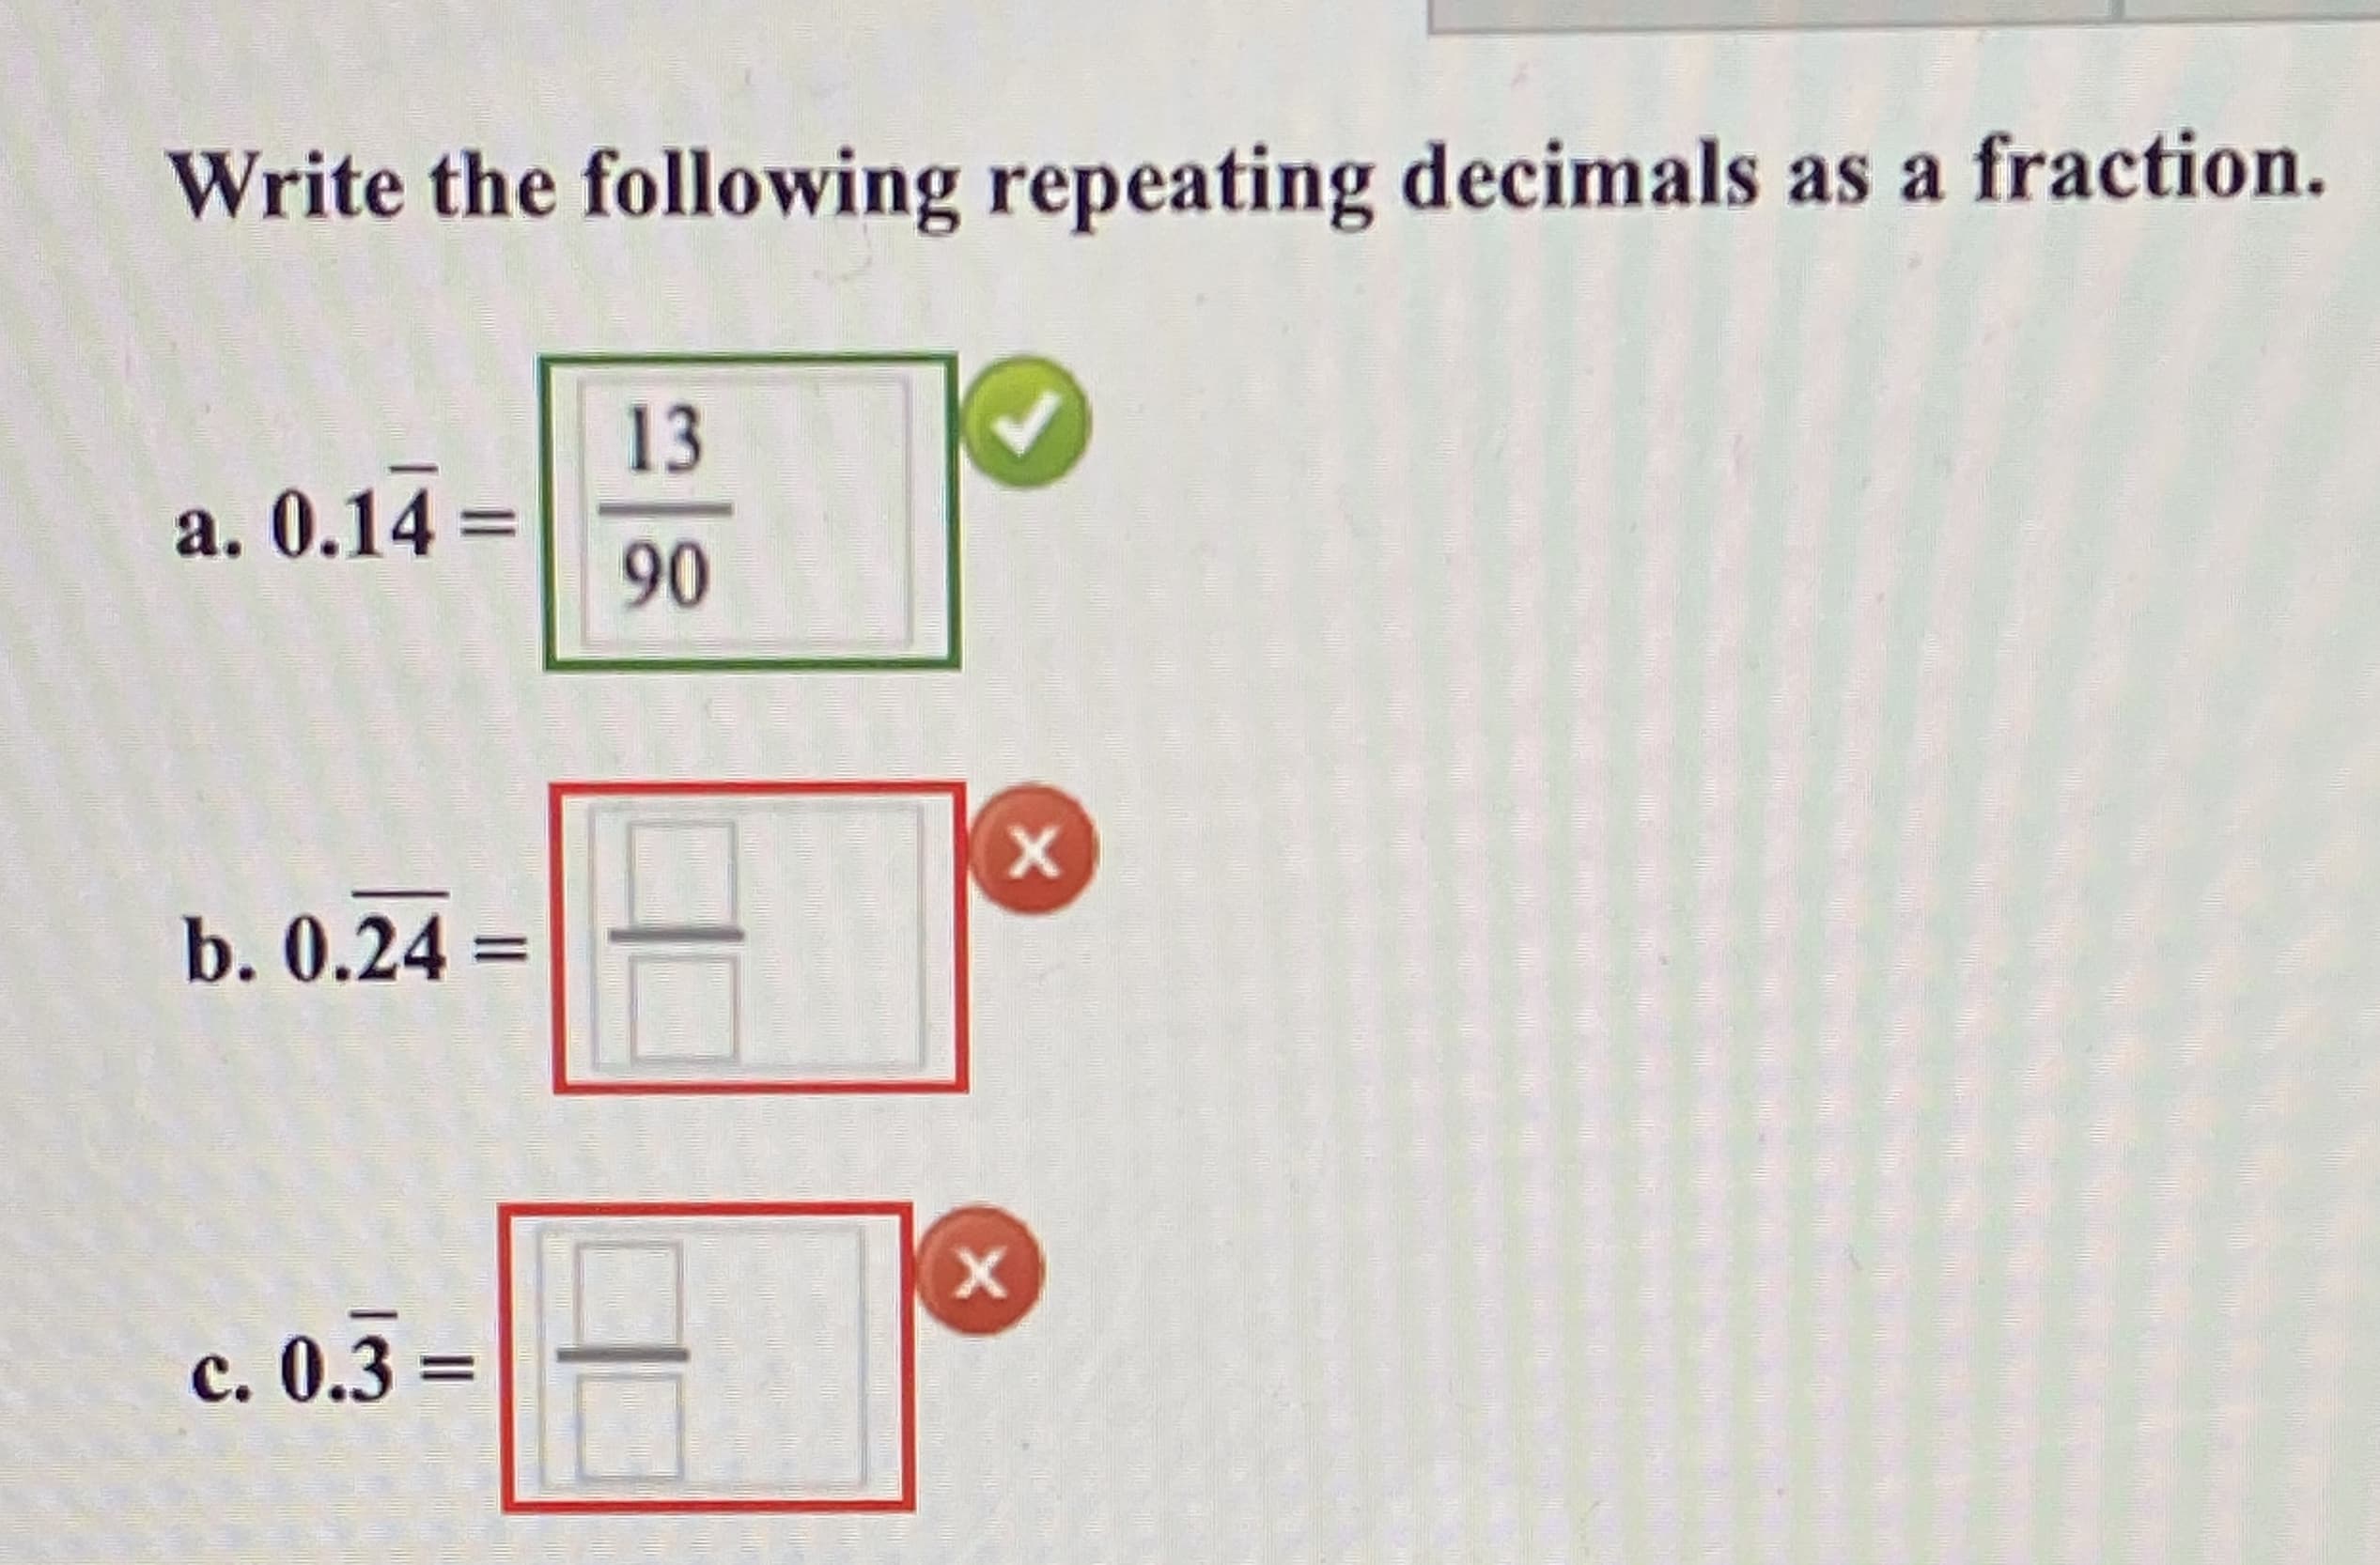 Write the following repeating decimals as a fraction.
13
a. 0.14 =
90
b. 0.24 =
с. 0.3 -
